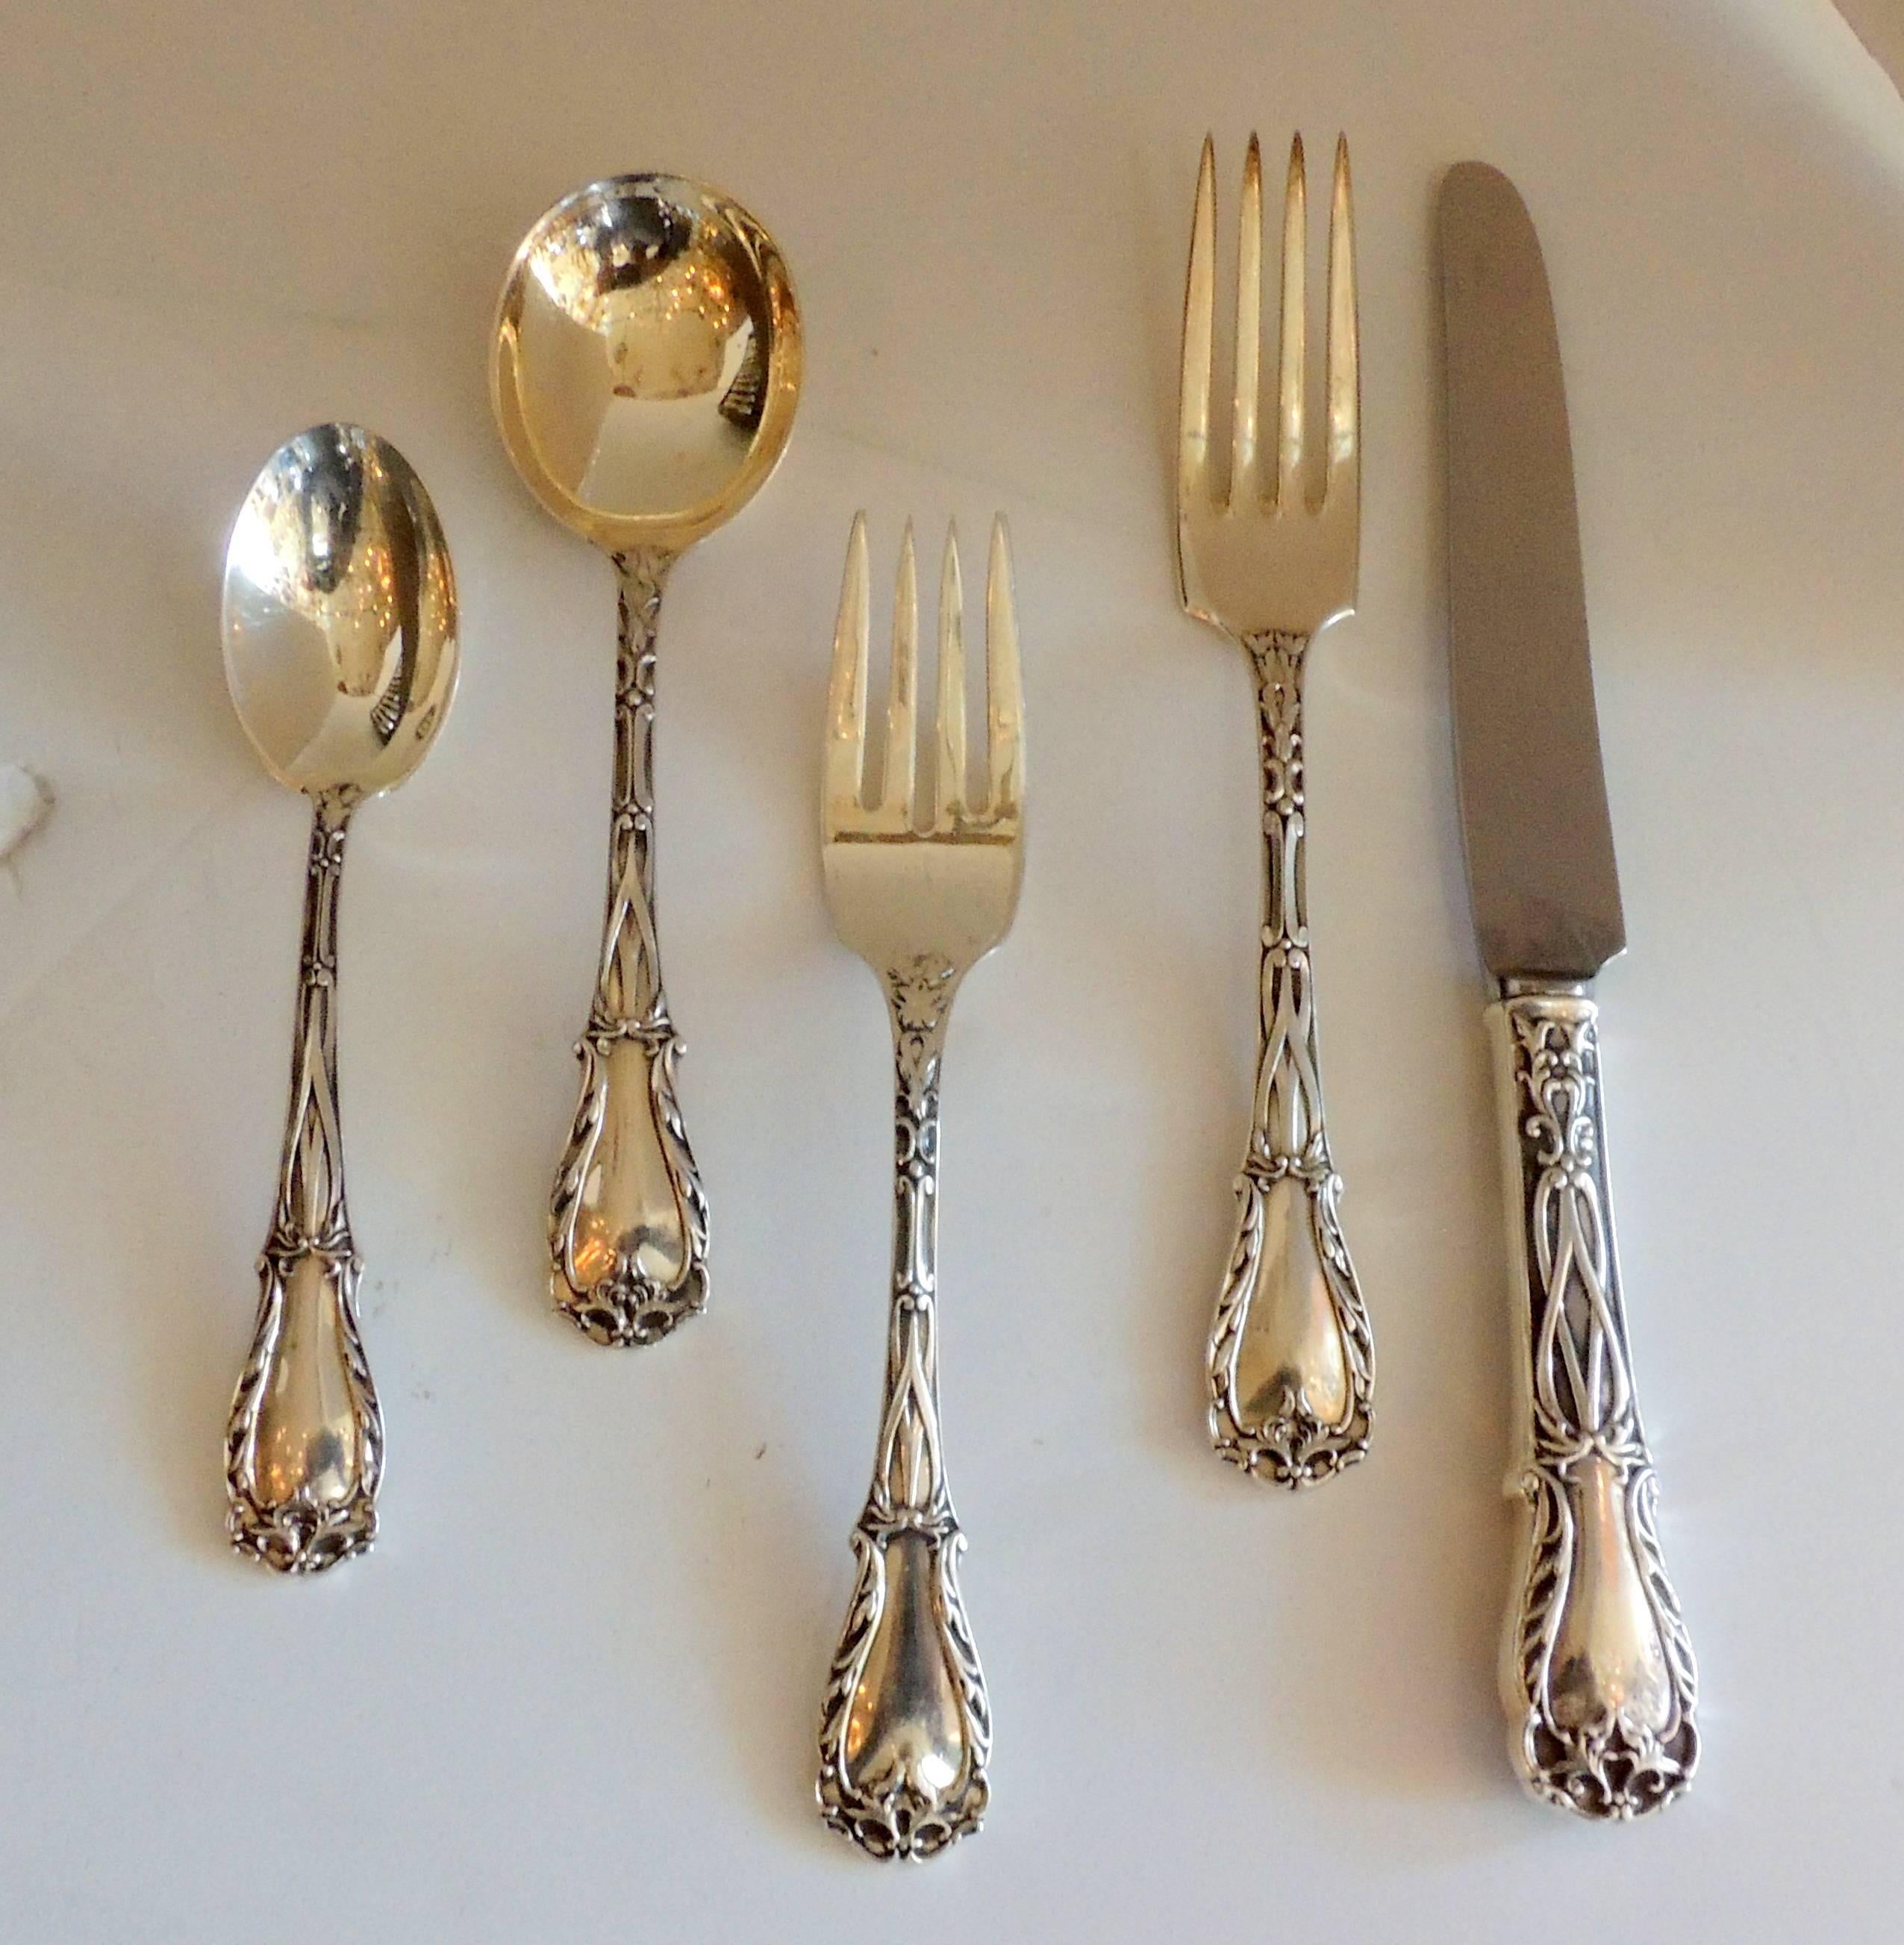 A wonderful Kirk & Son sterling silver flatware set in box, the quadrille pattern 67 pieces total including serving pieces. With no monogram
Set consisting of:
9